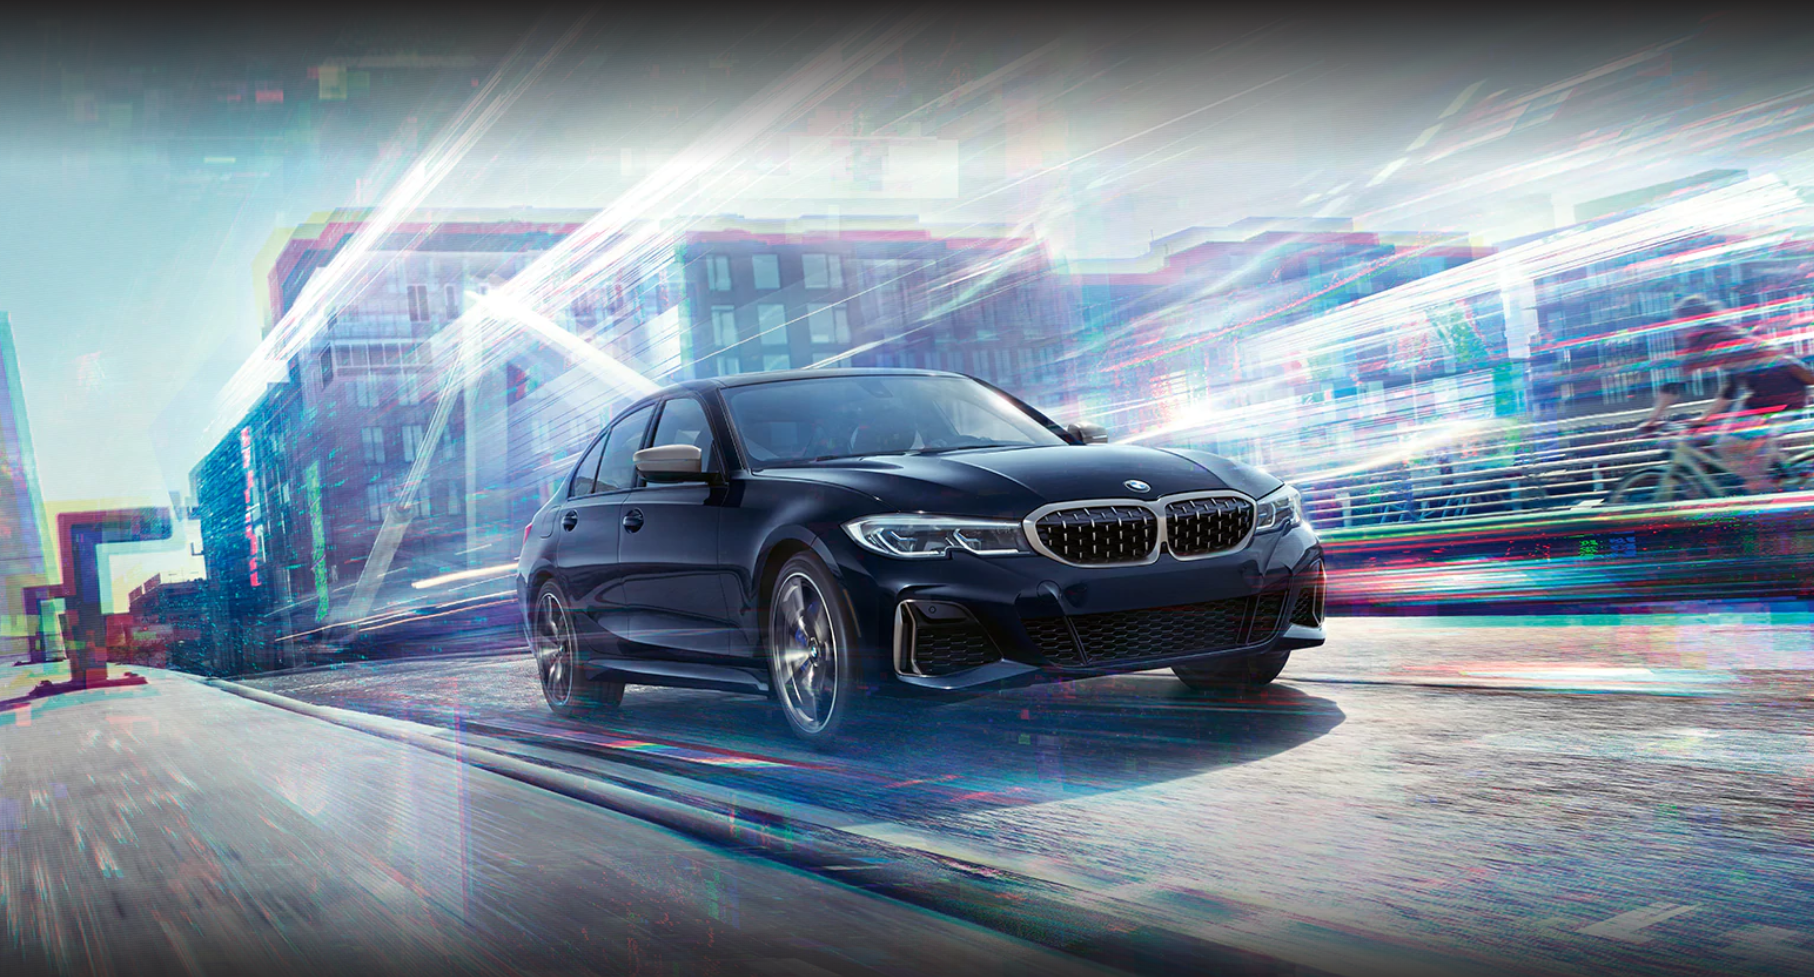 The 2020 BMW 3 Series: The Next Generation